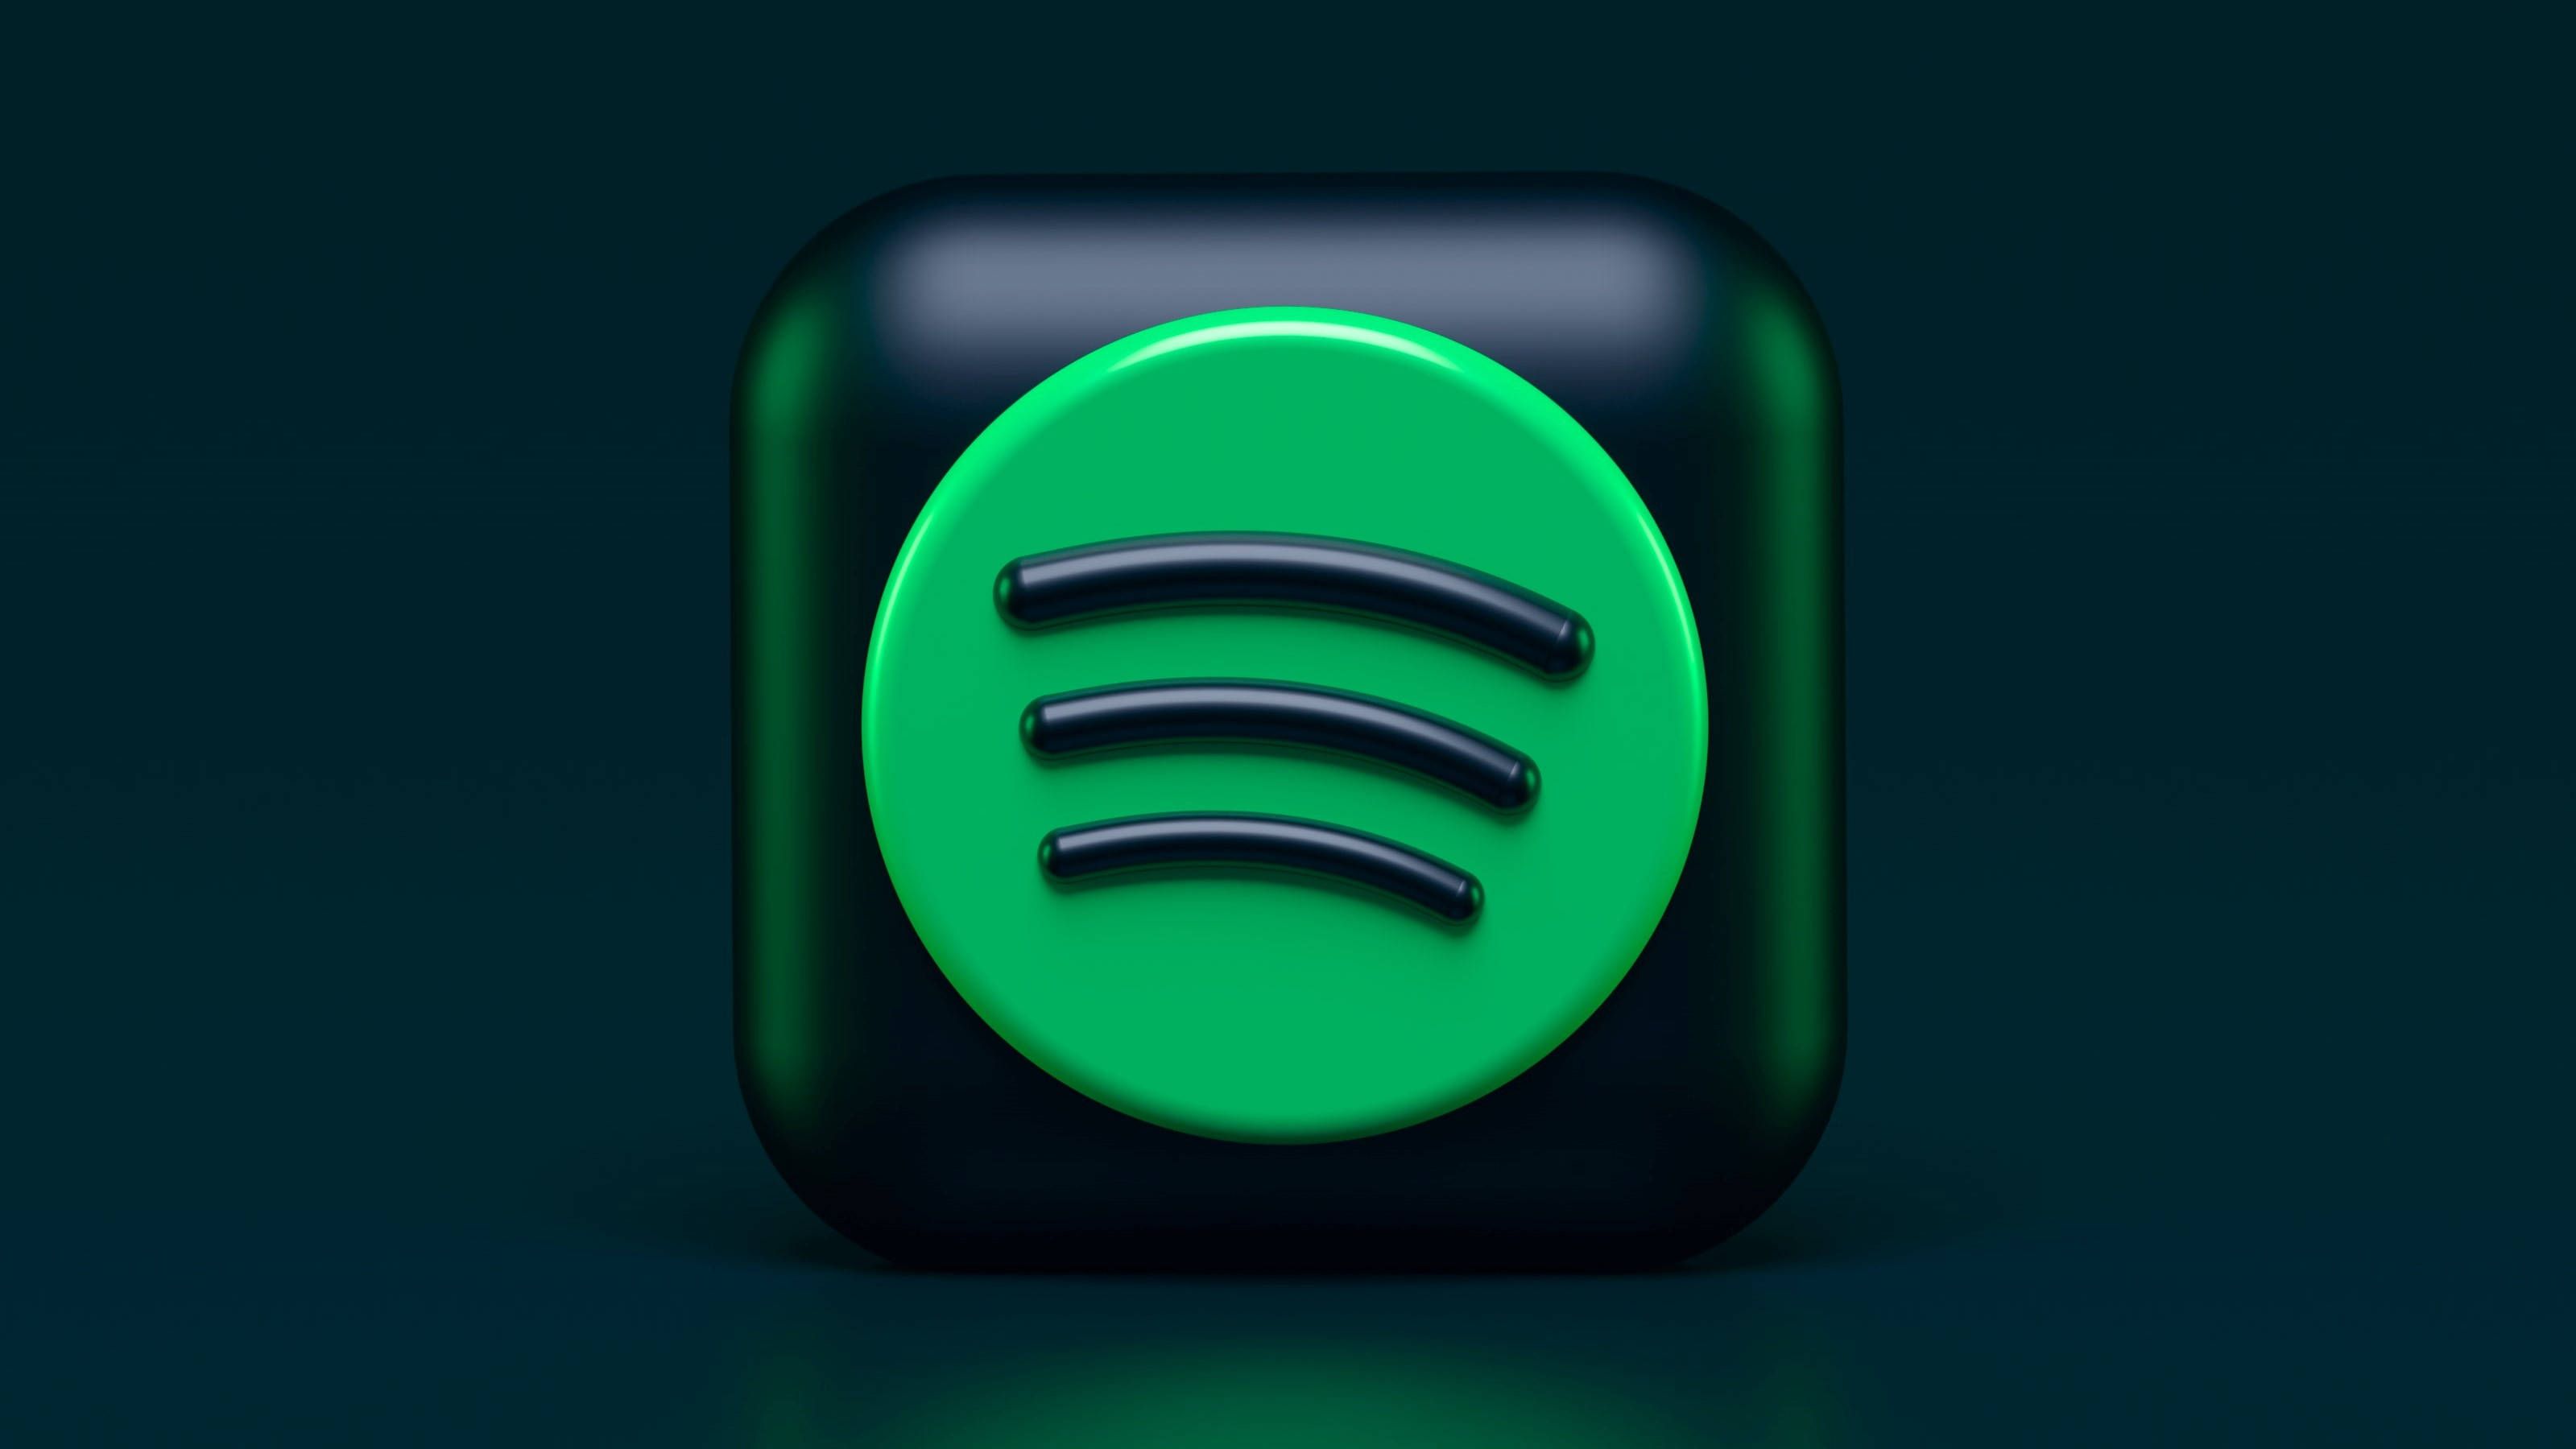 A green button with the sound logo on it - Spotify, 3D